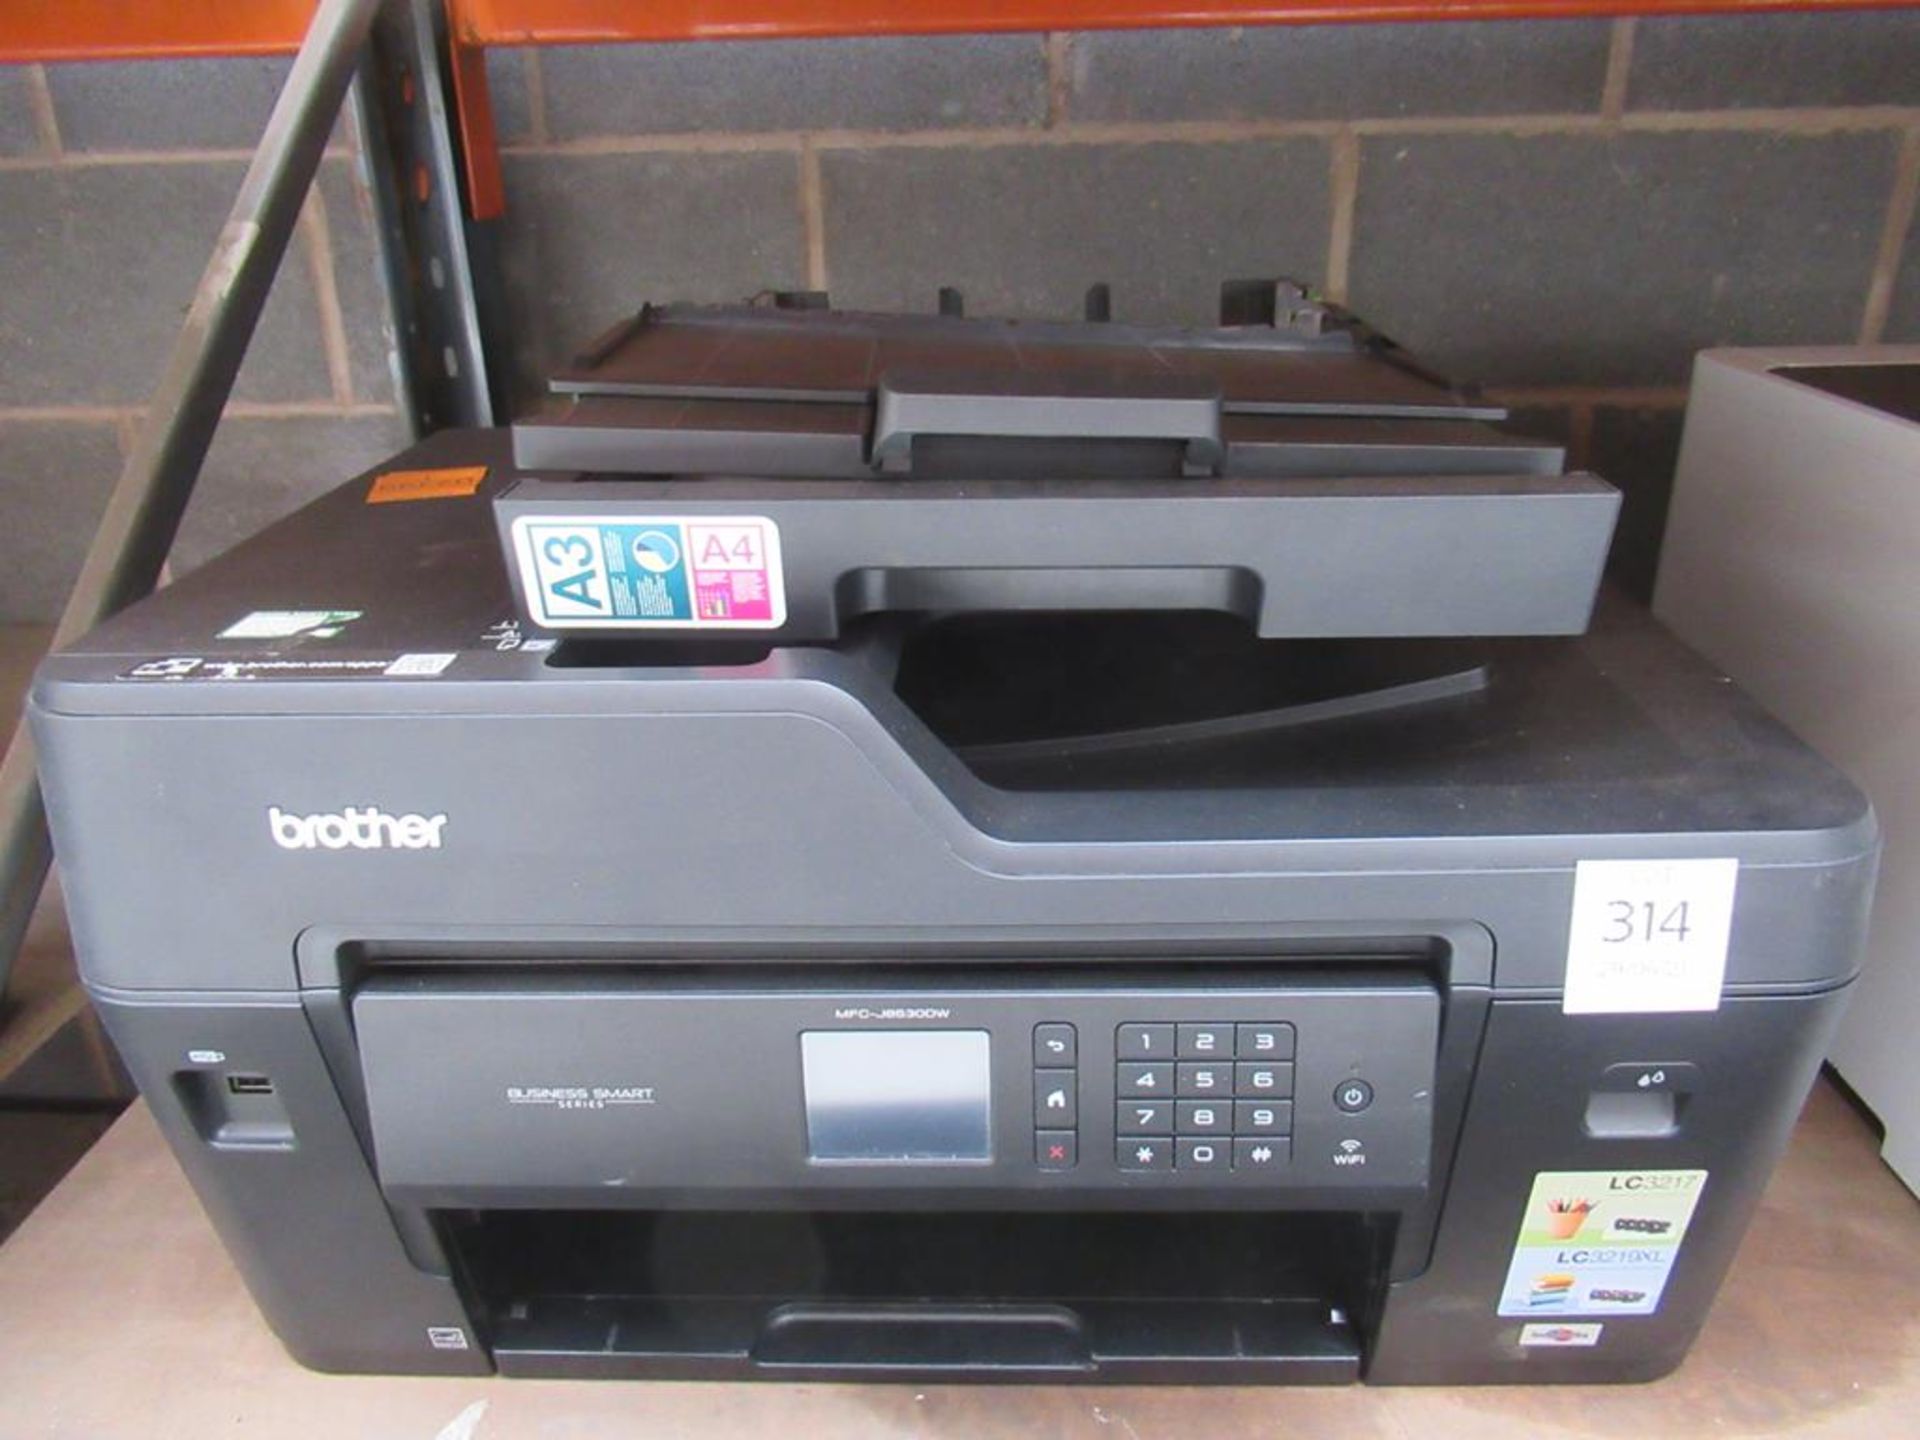 Brother MFC-J6530DW Multi-Function Printer